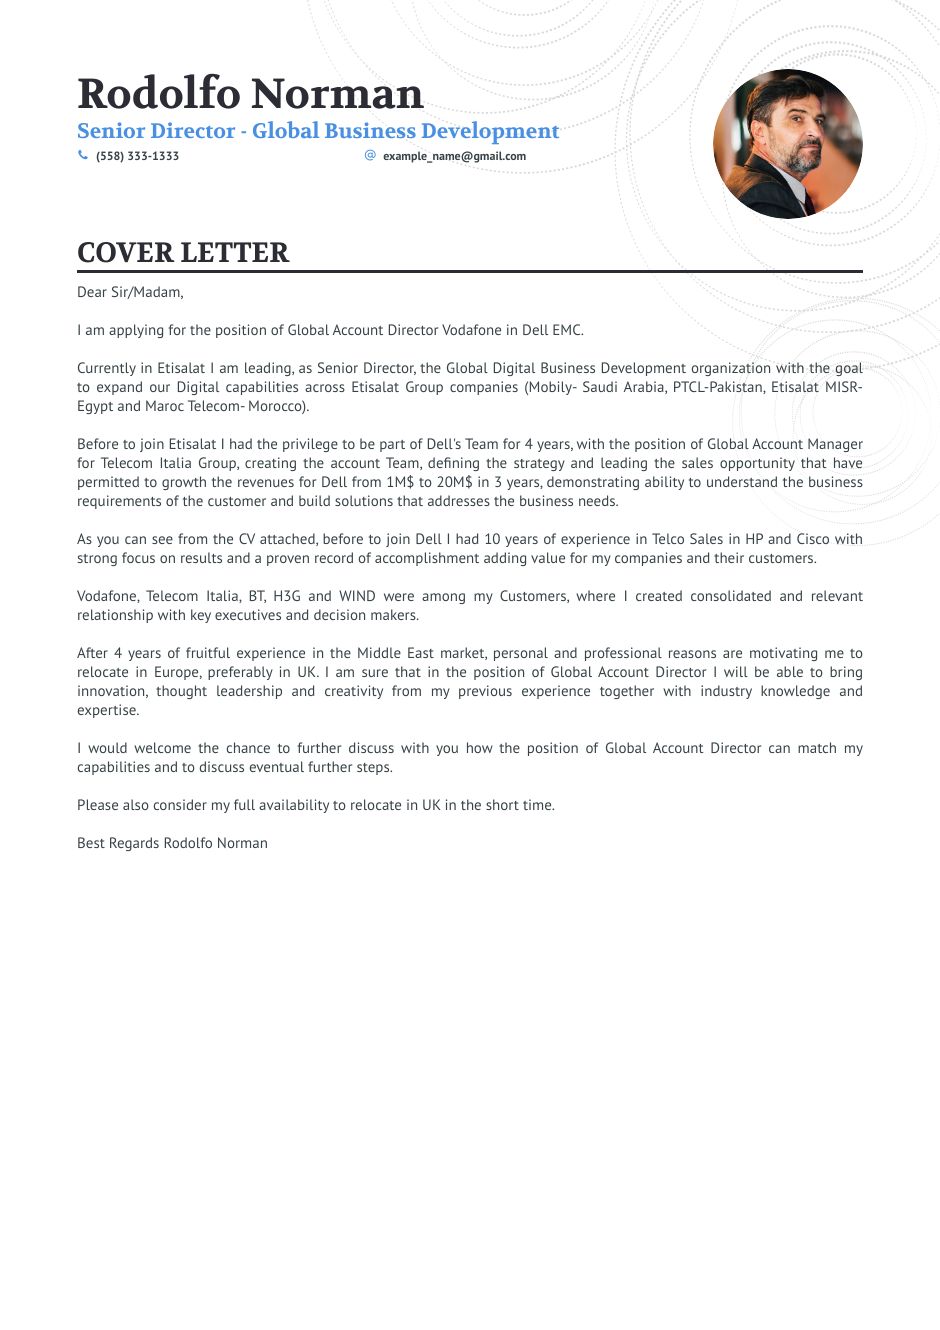 account-director-coverletter.png